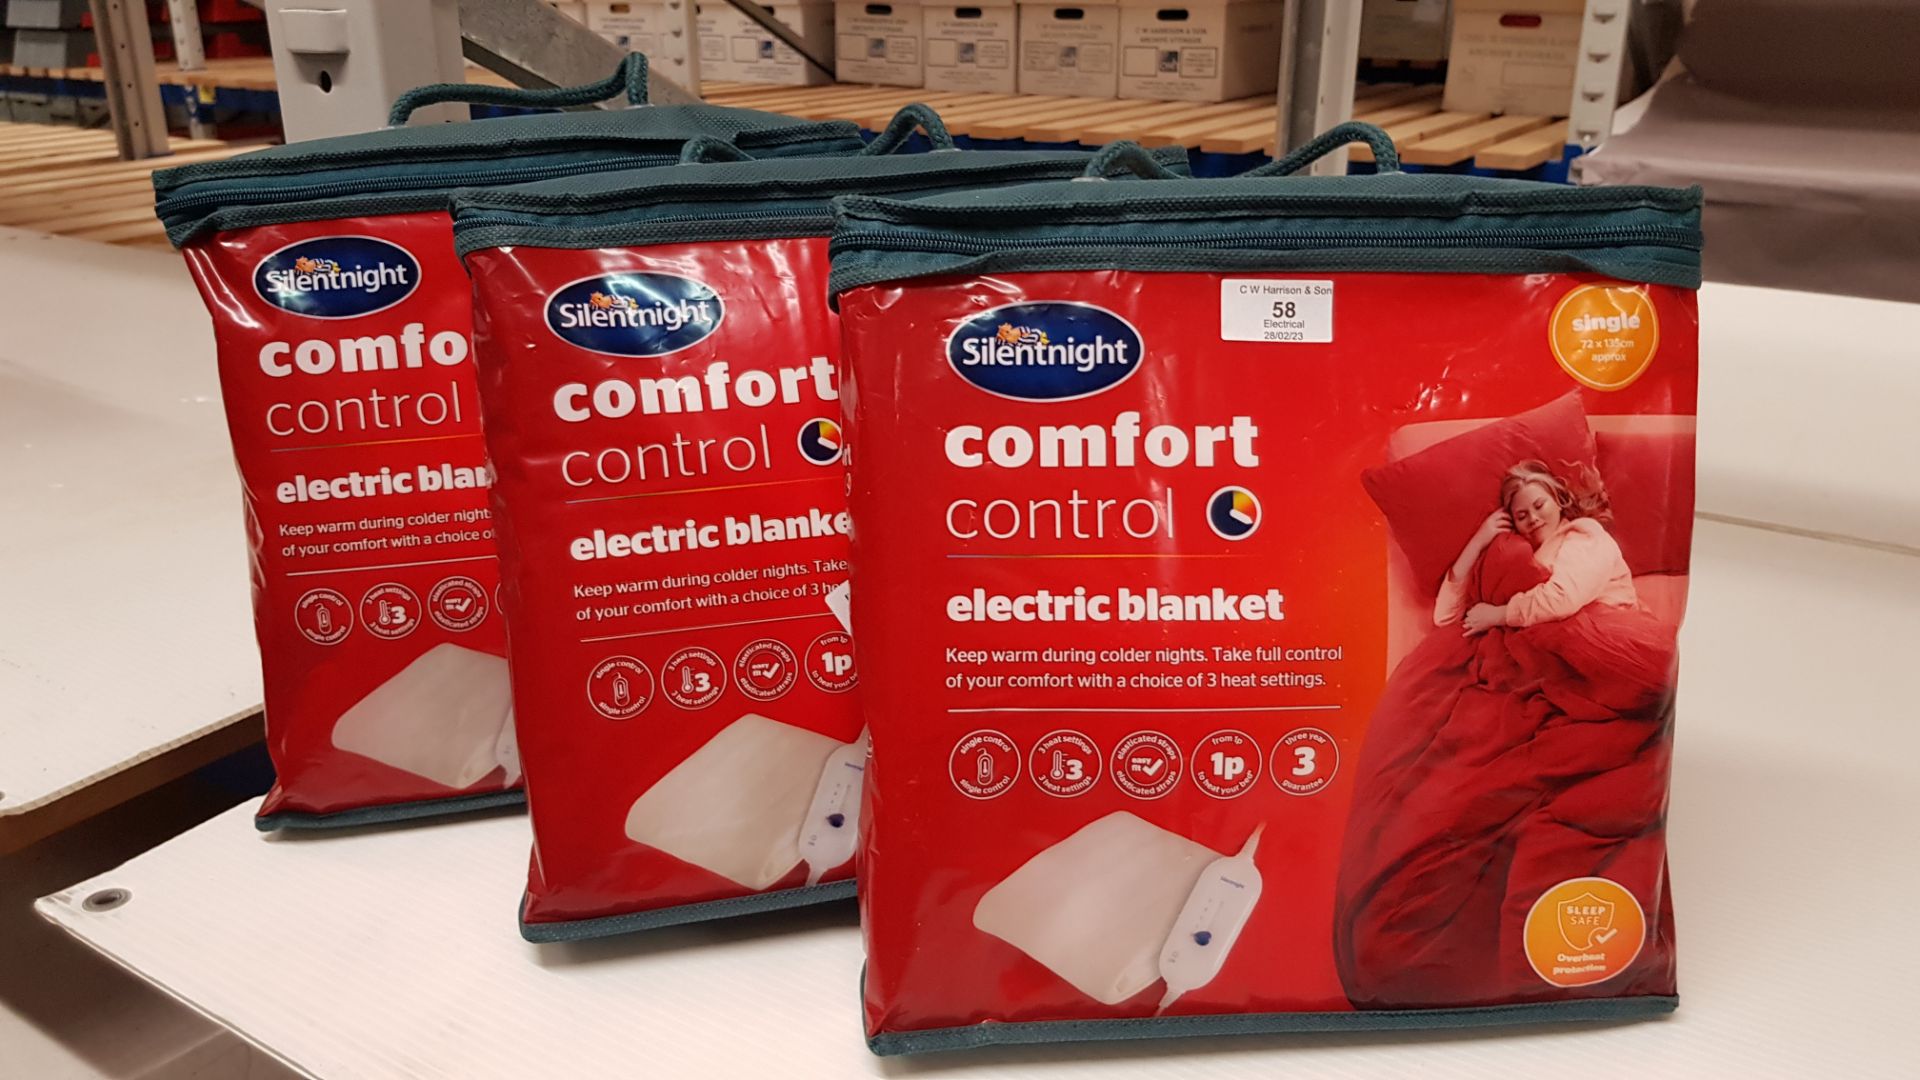 3x Silentnight Comfort Control Electric Blanket Single. RRP £45 Each. - Image 2 of 3